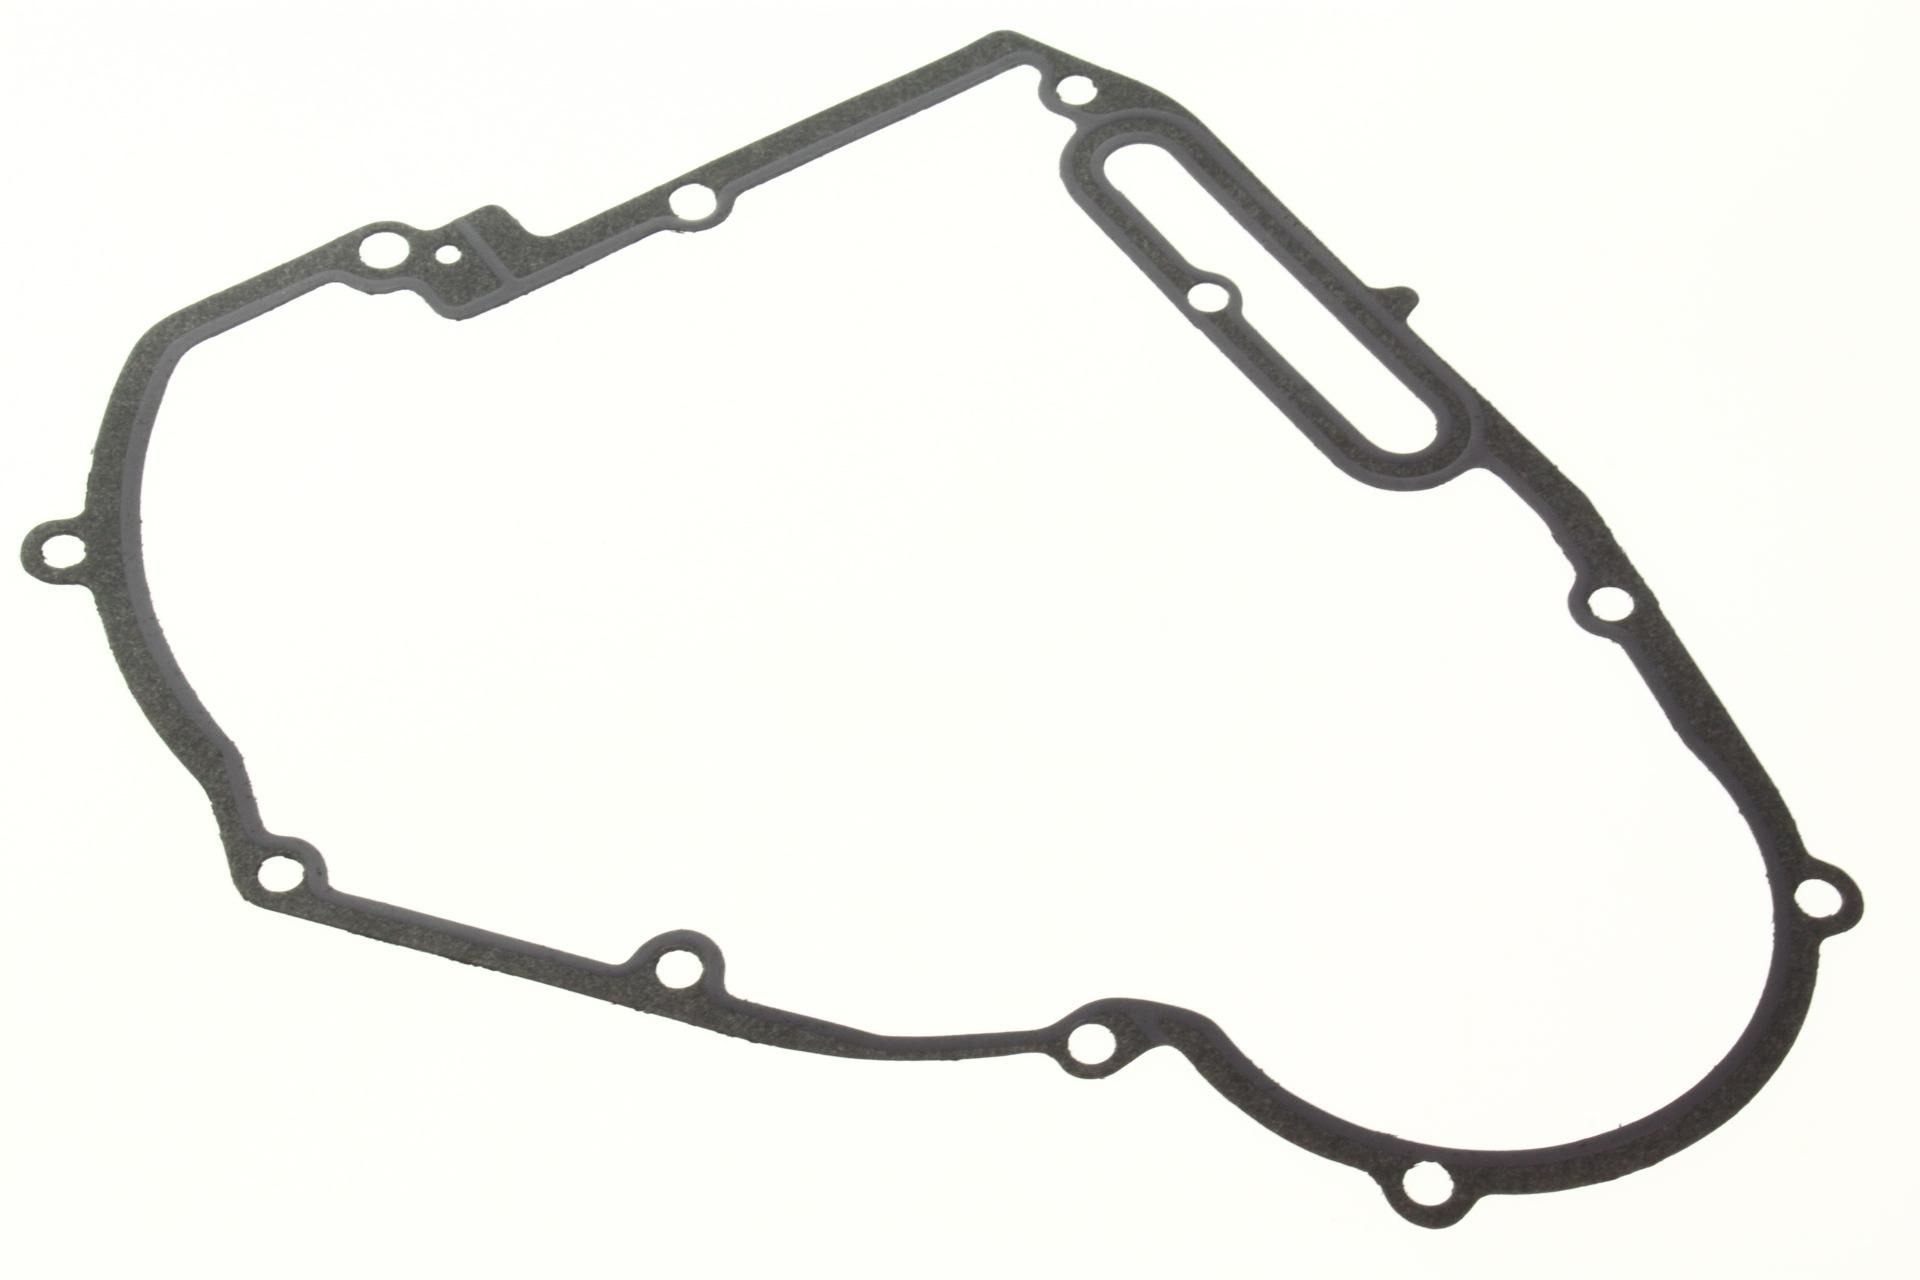 5812936 MAG DOUBLE BEAD COVER GASKET